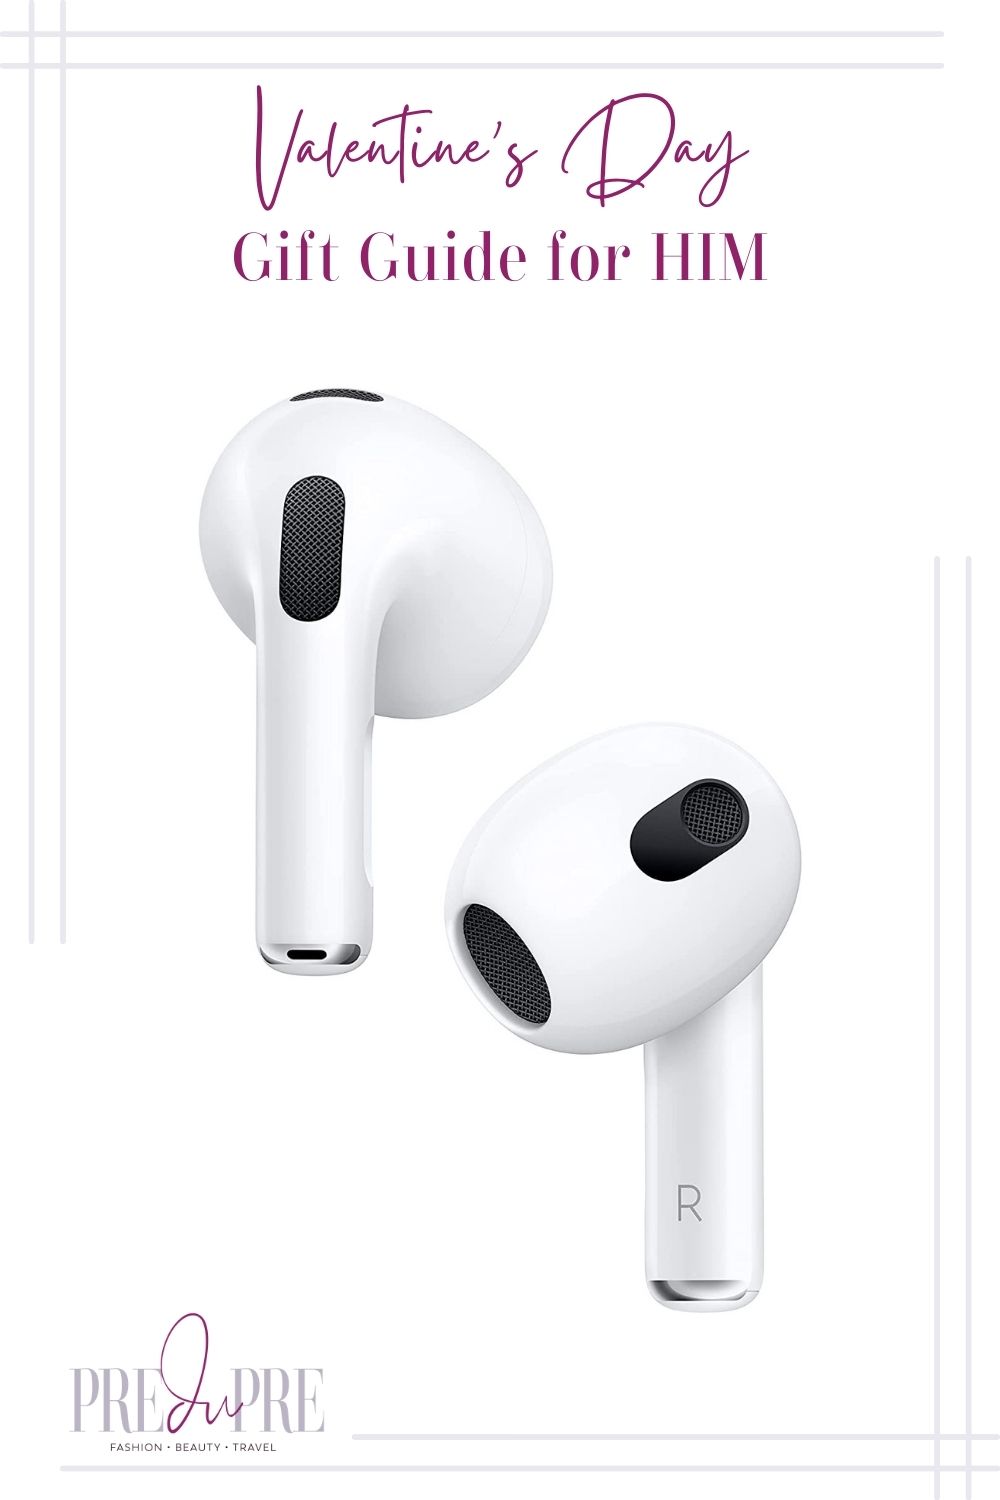 White AirPods image with text in the center top stating "Valentine's Day Gift Guide for Him."